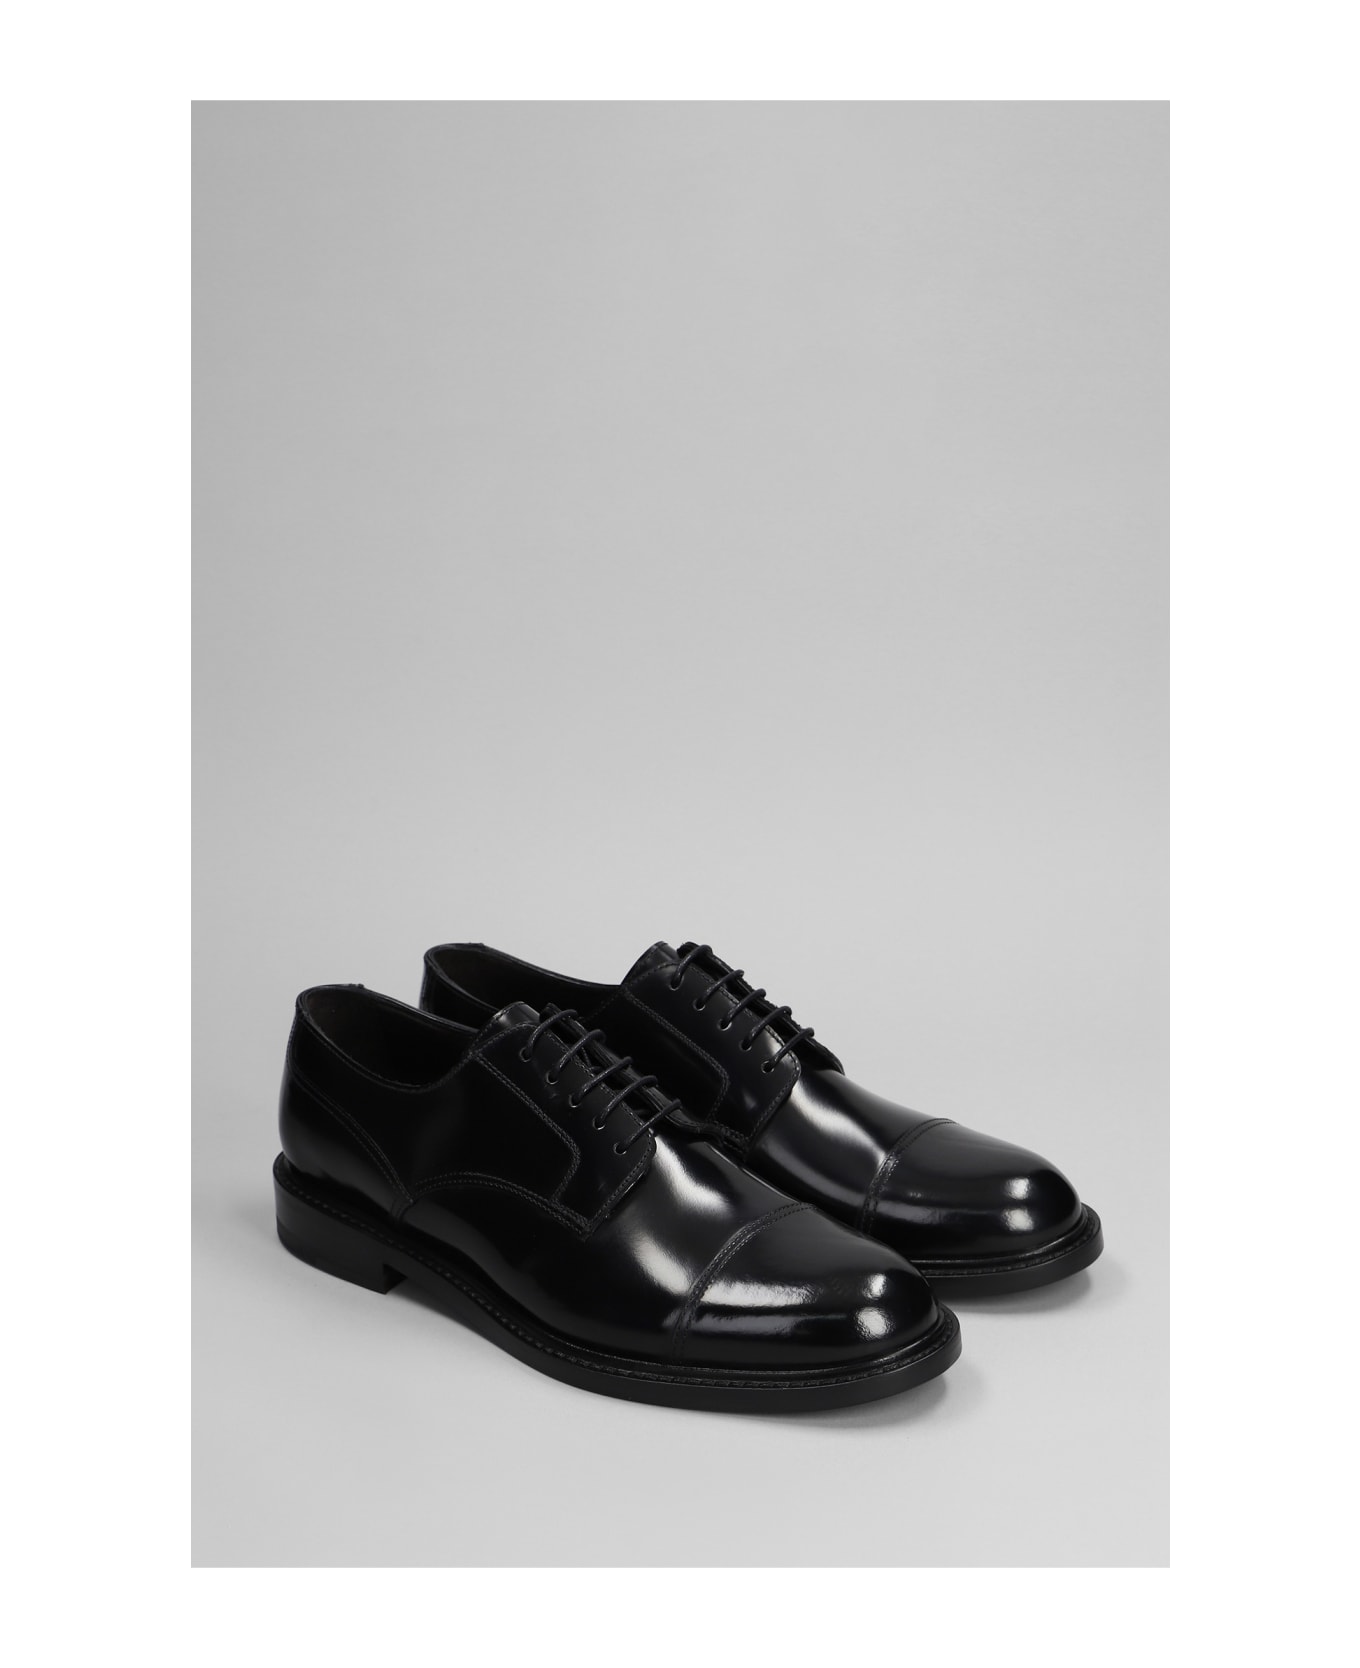 Tagliatore 0205 Casey Lace Up Shoes In Black Leather - black